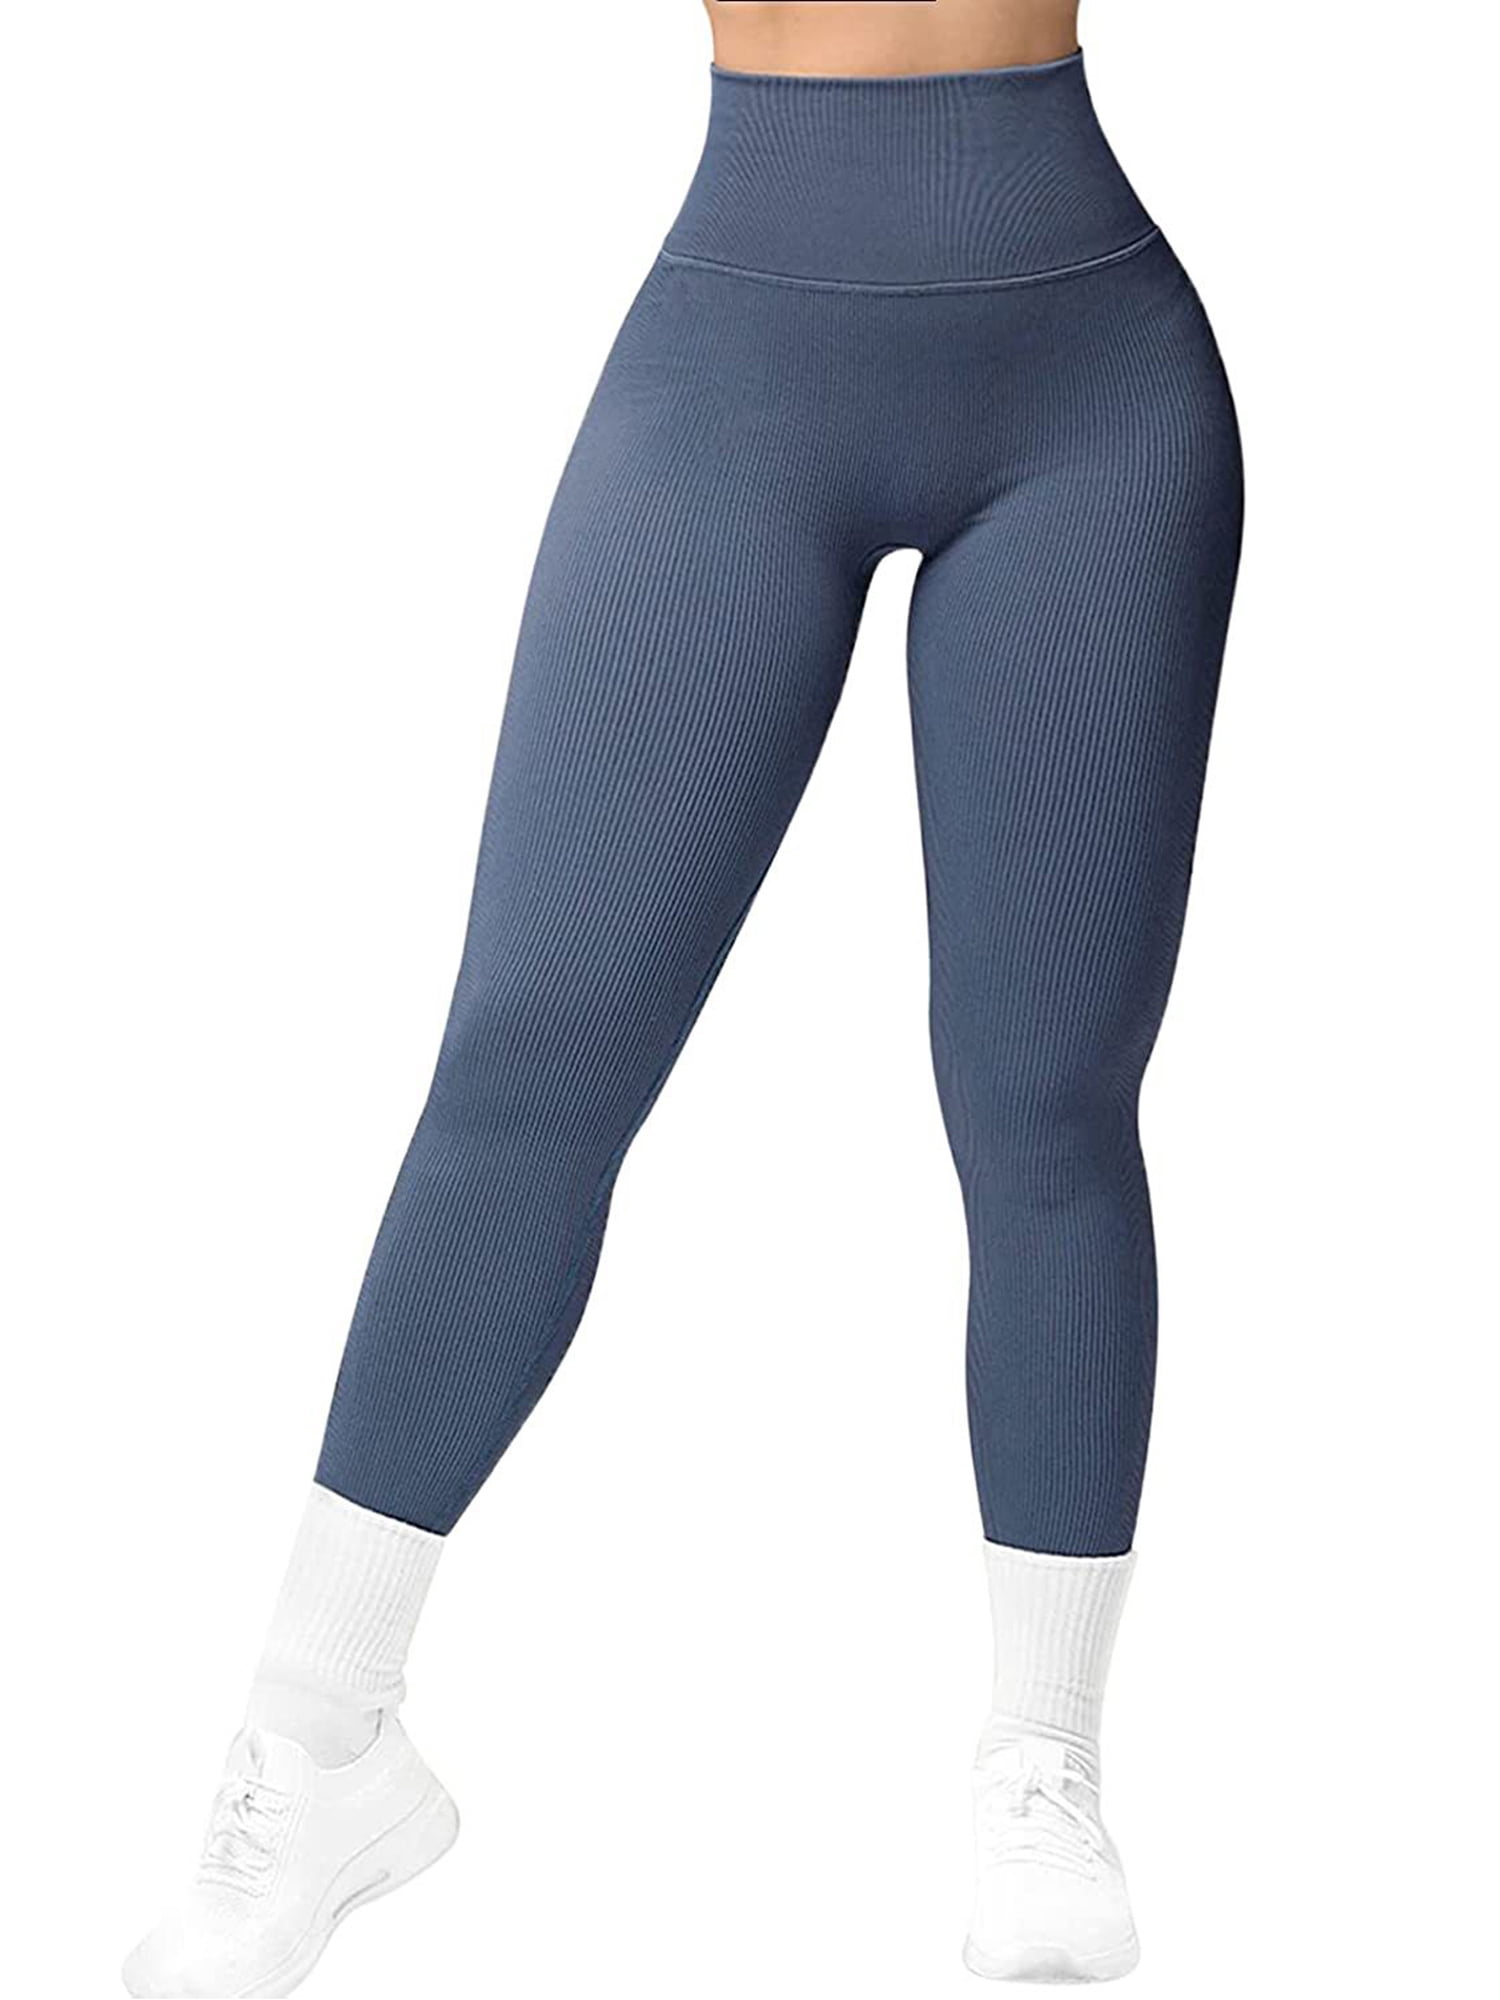 Soft Leggings for Women - High Waisted Tummy Control No See